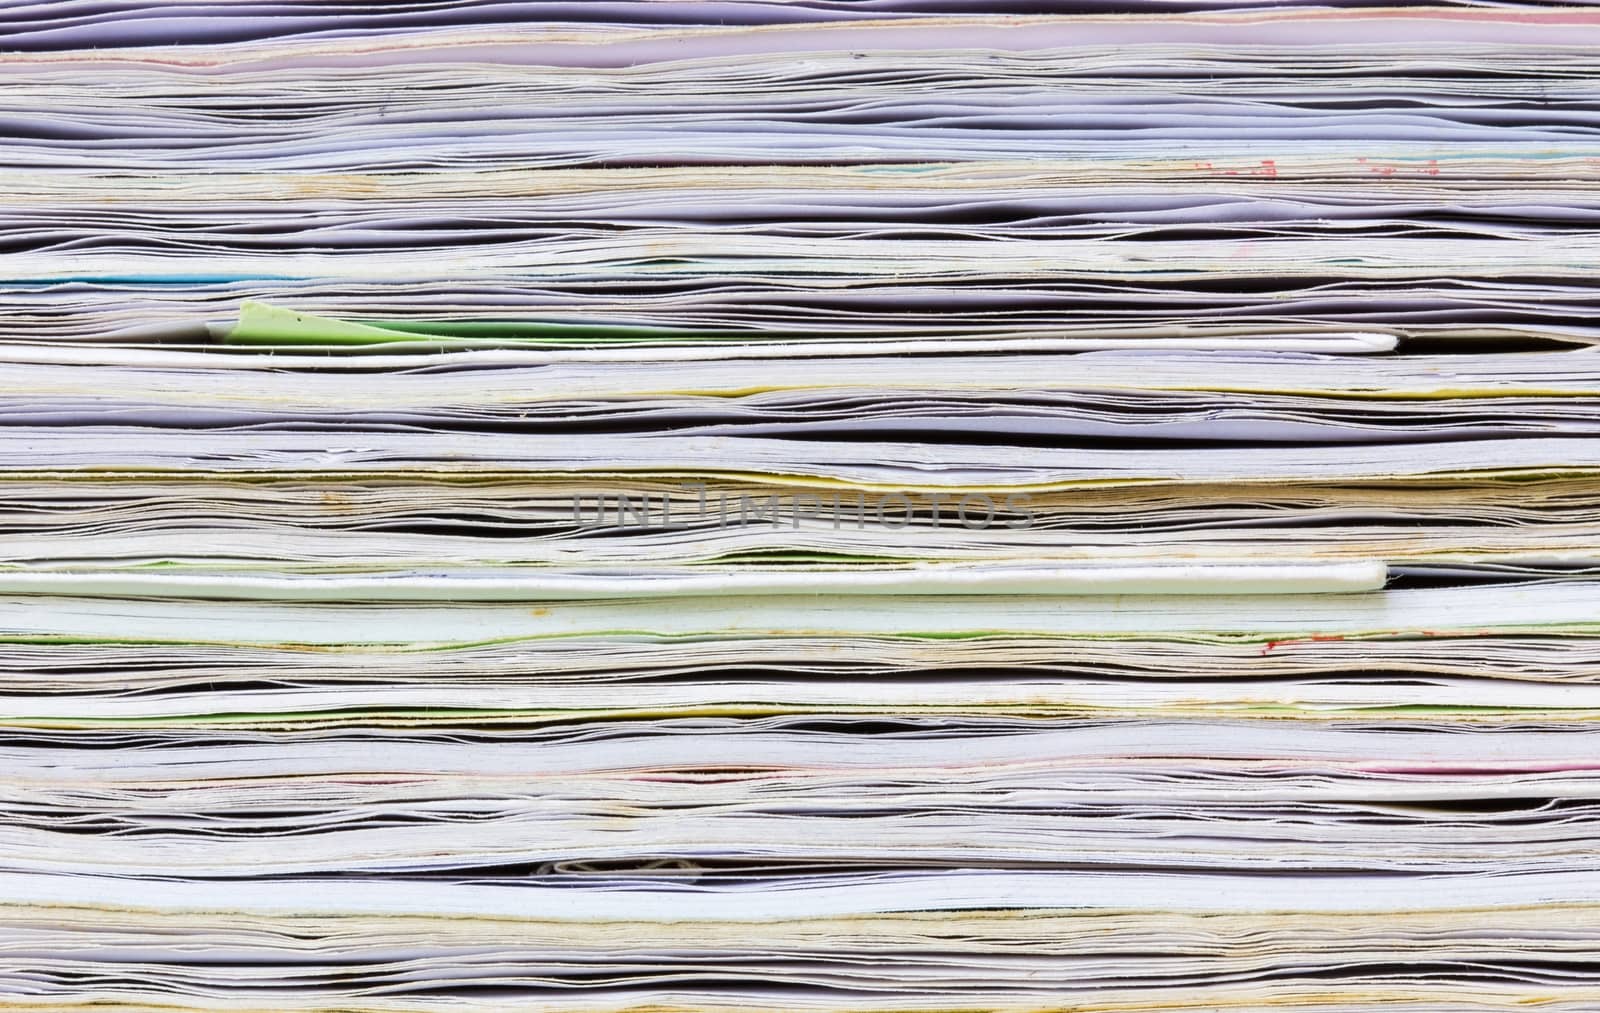 close-up of old colorful notebook spine  by a3701027